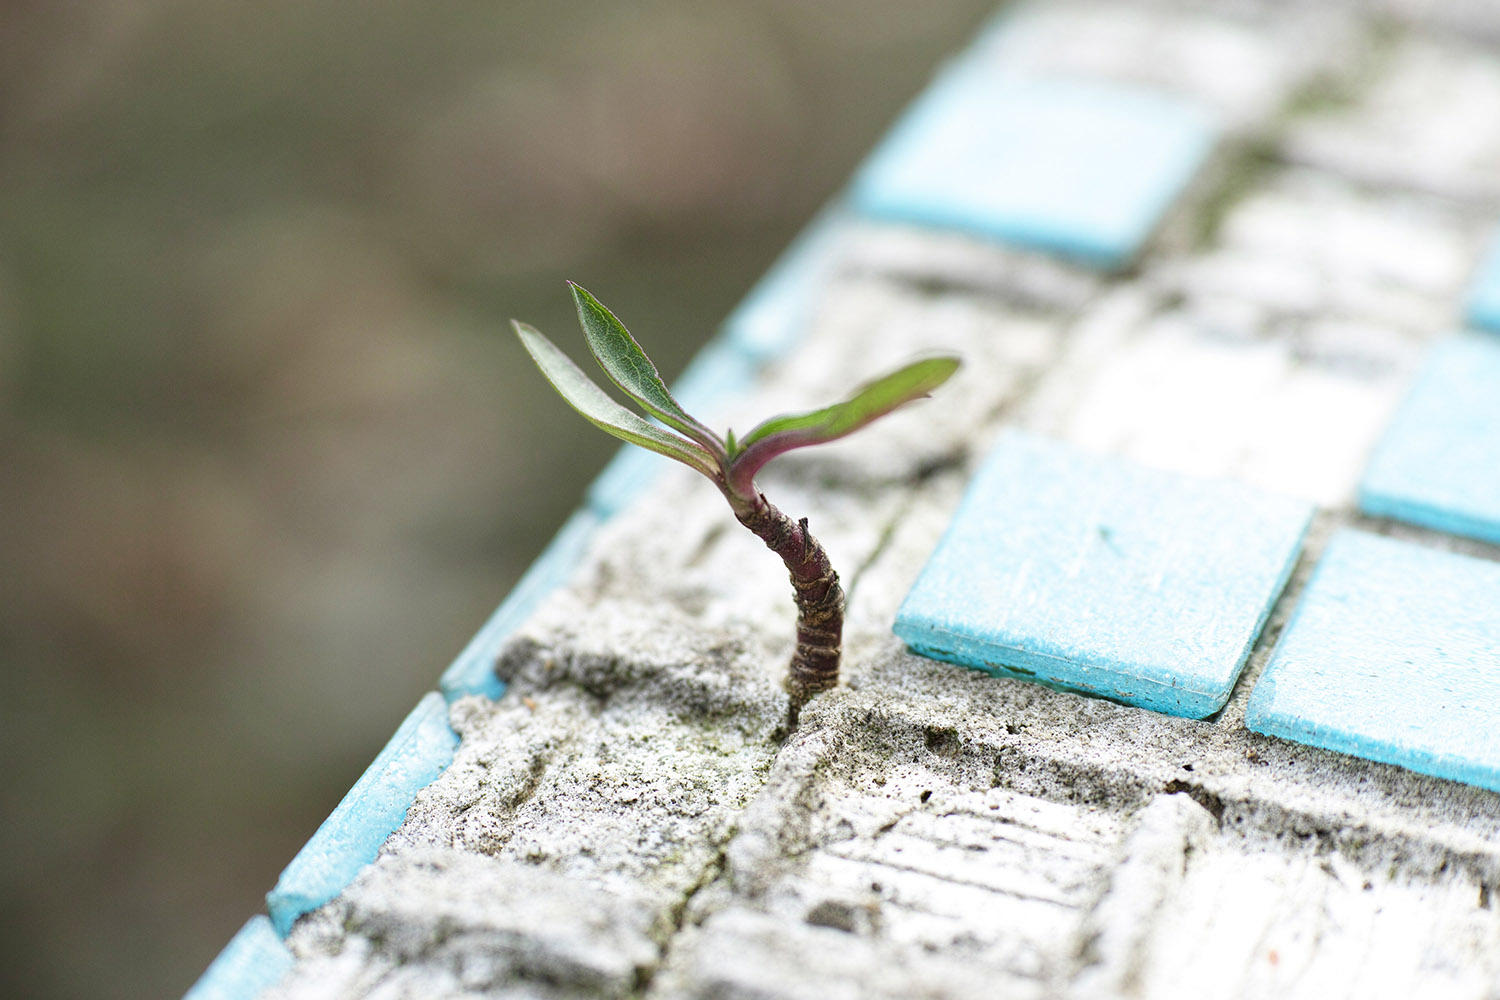 Small plant sprouts from cement and tile